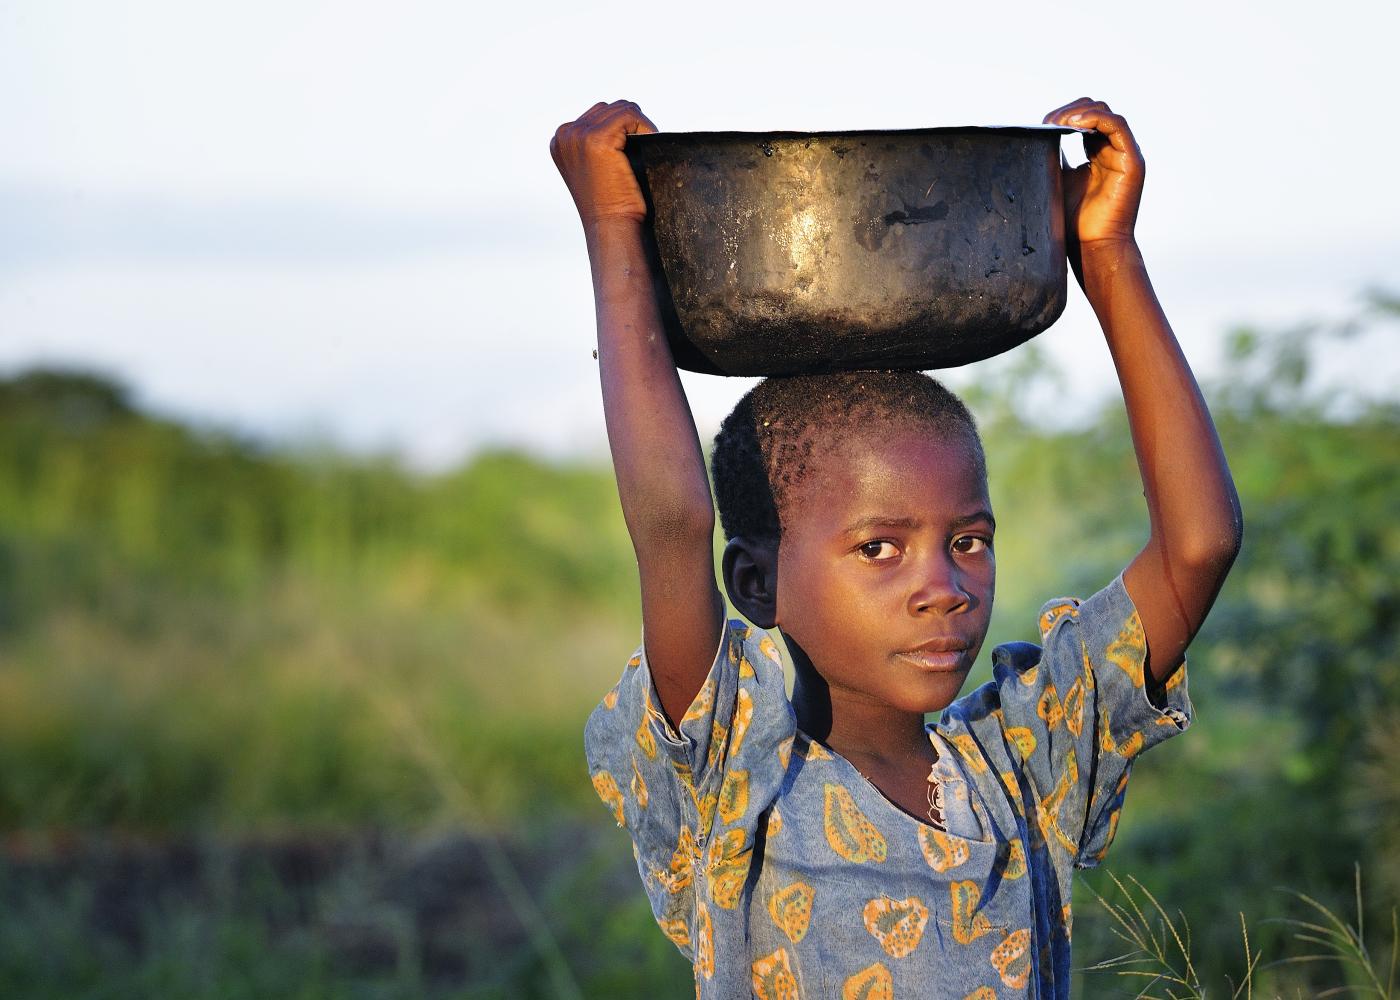 Children from Malawi carrying water